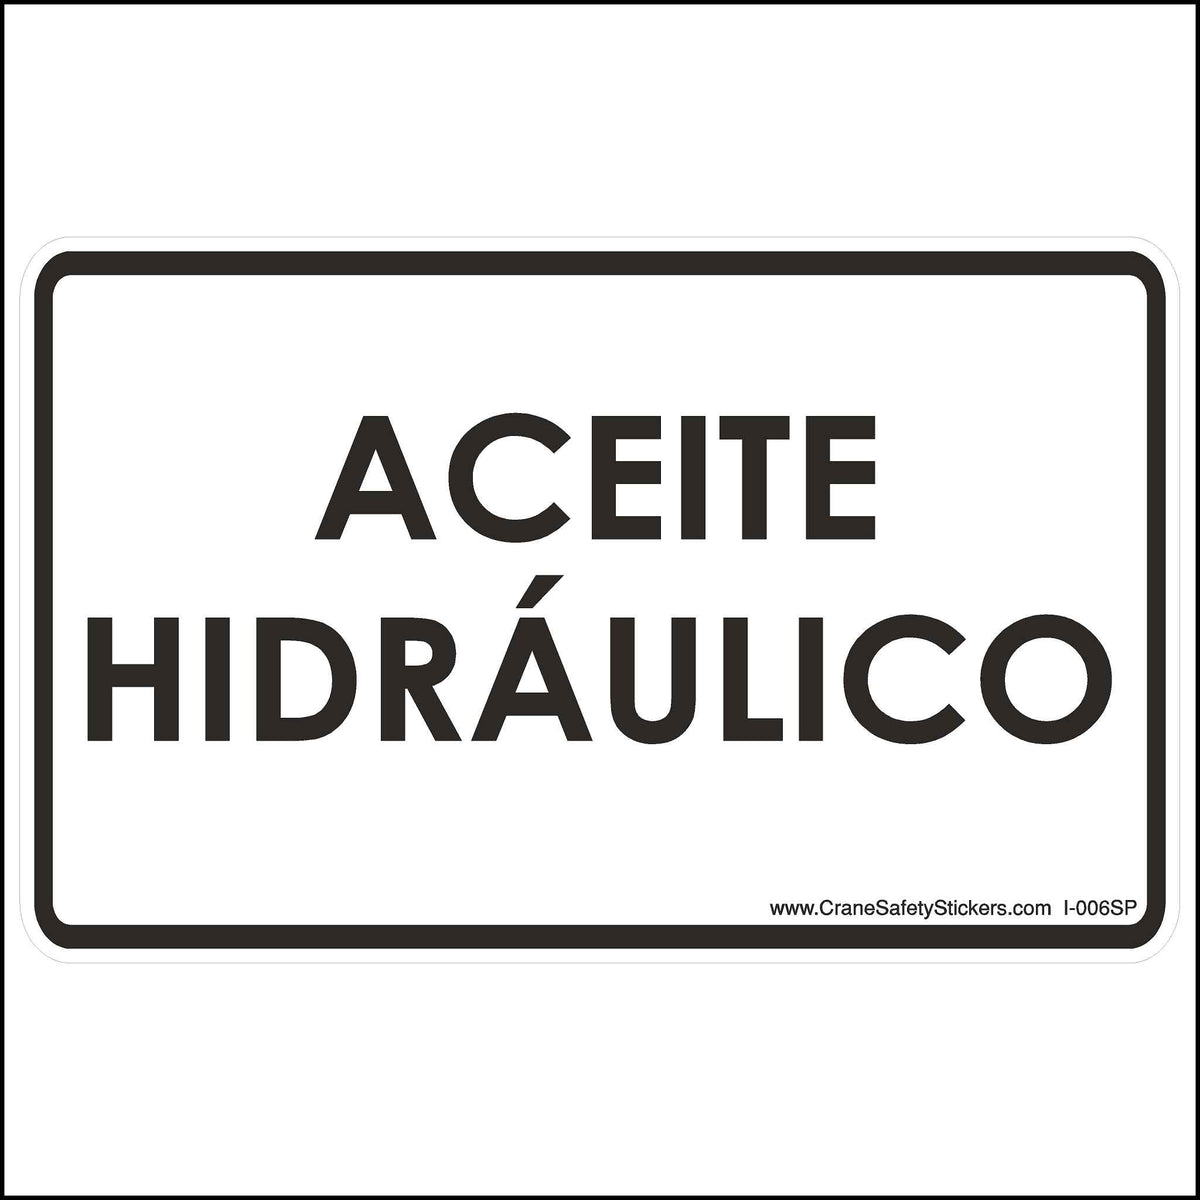 Spanish hydraulic oil sticker printed with &quot;ACEITE HIDRAULICO&quot;. Letters are in black on a white background.